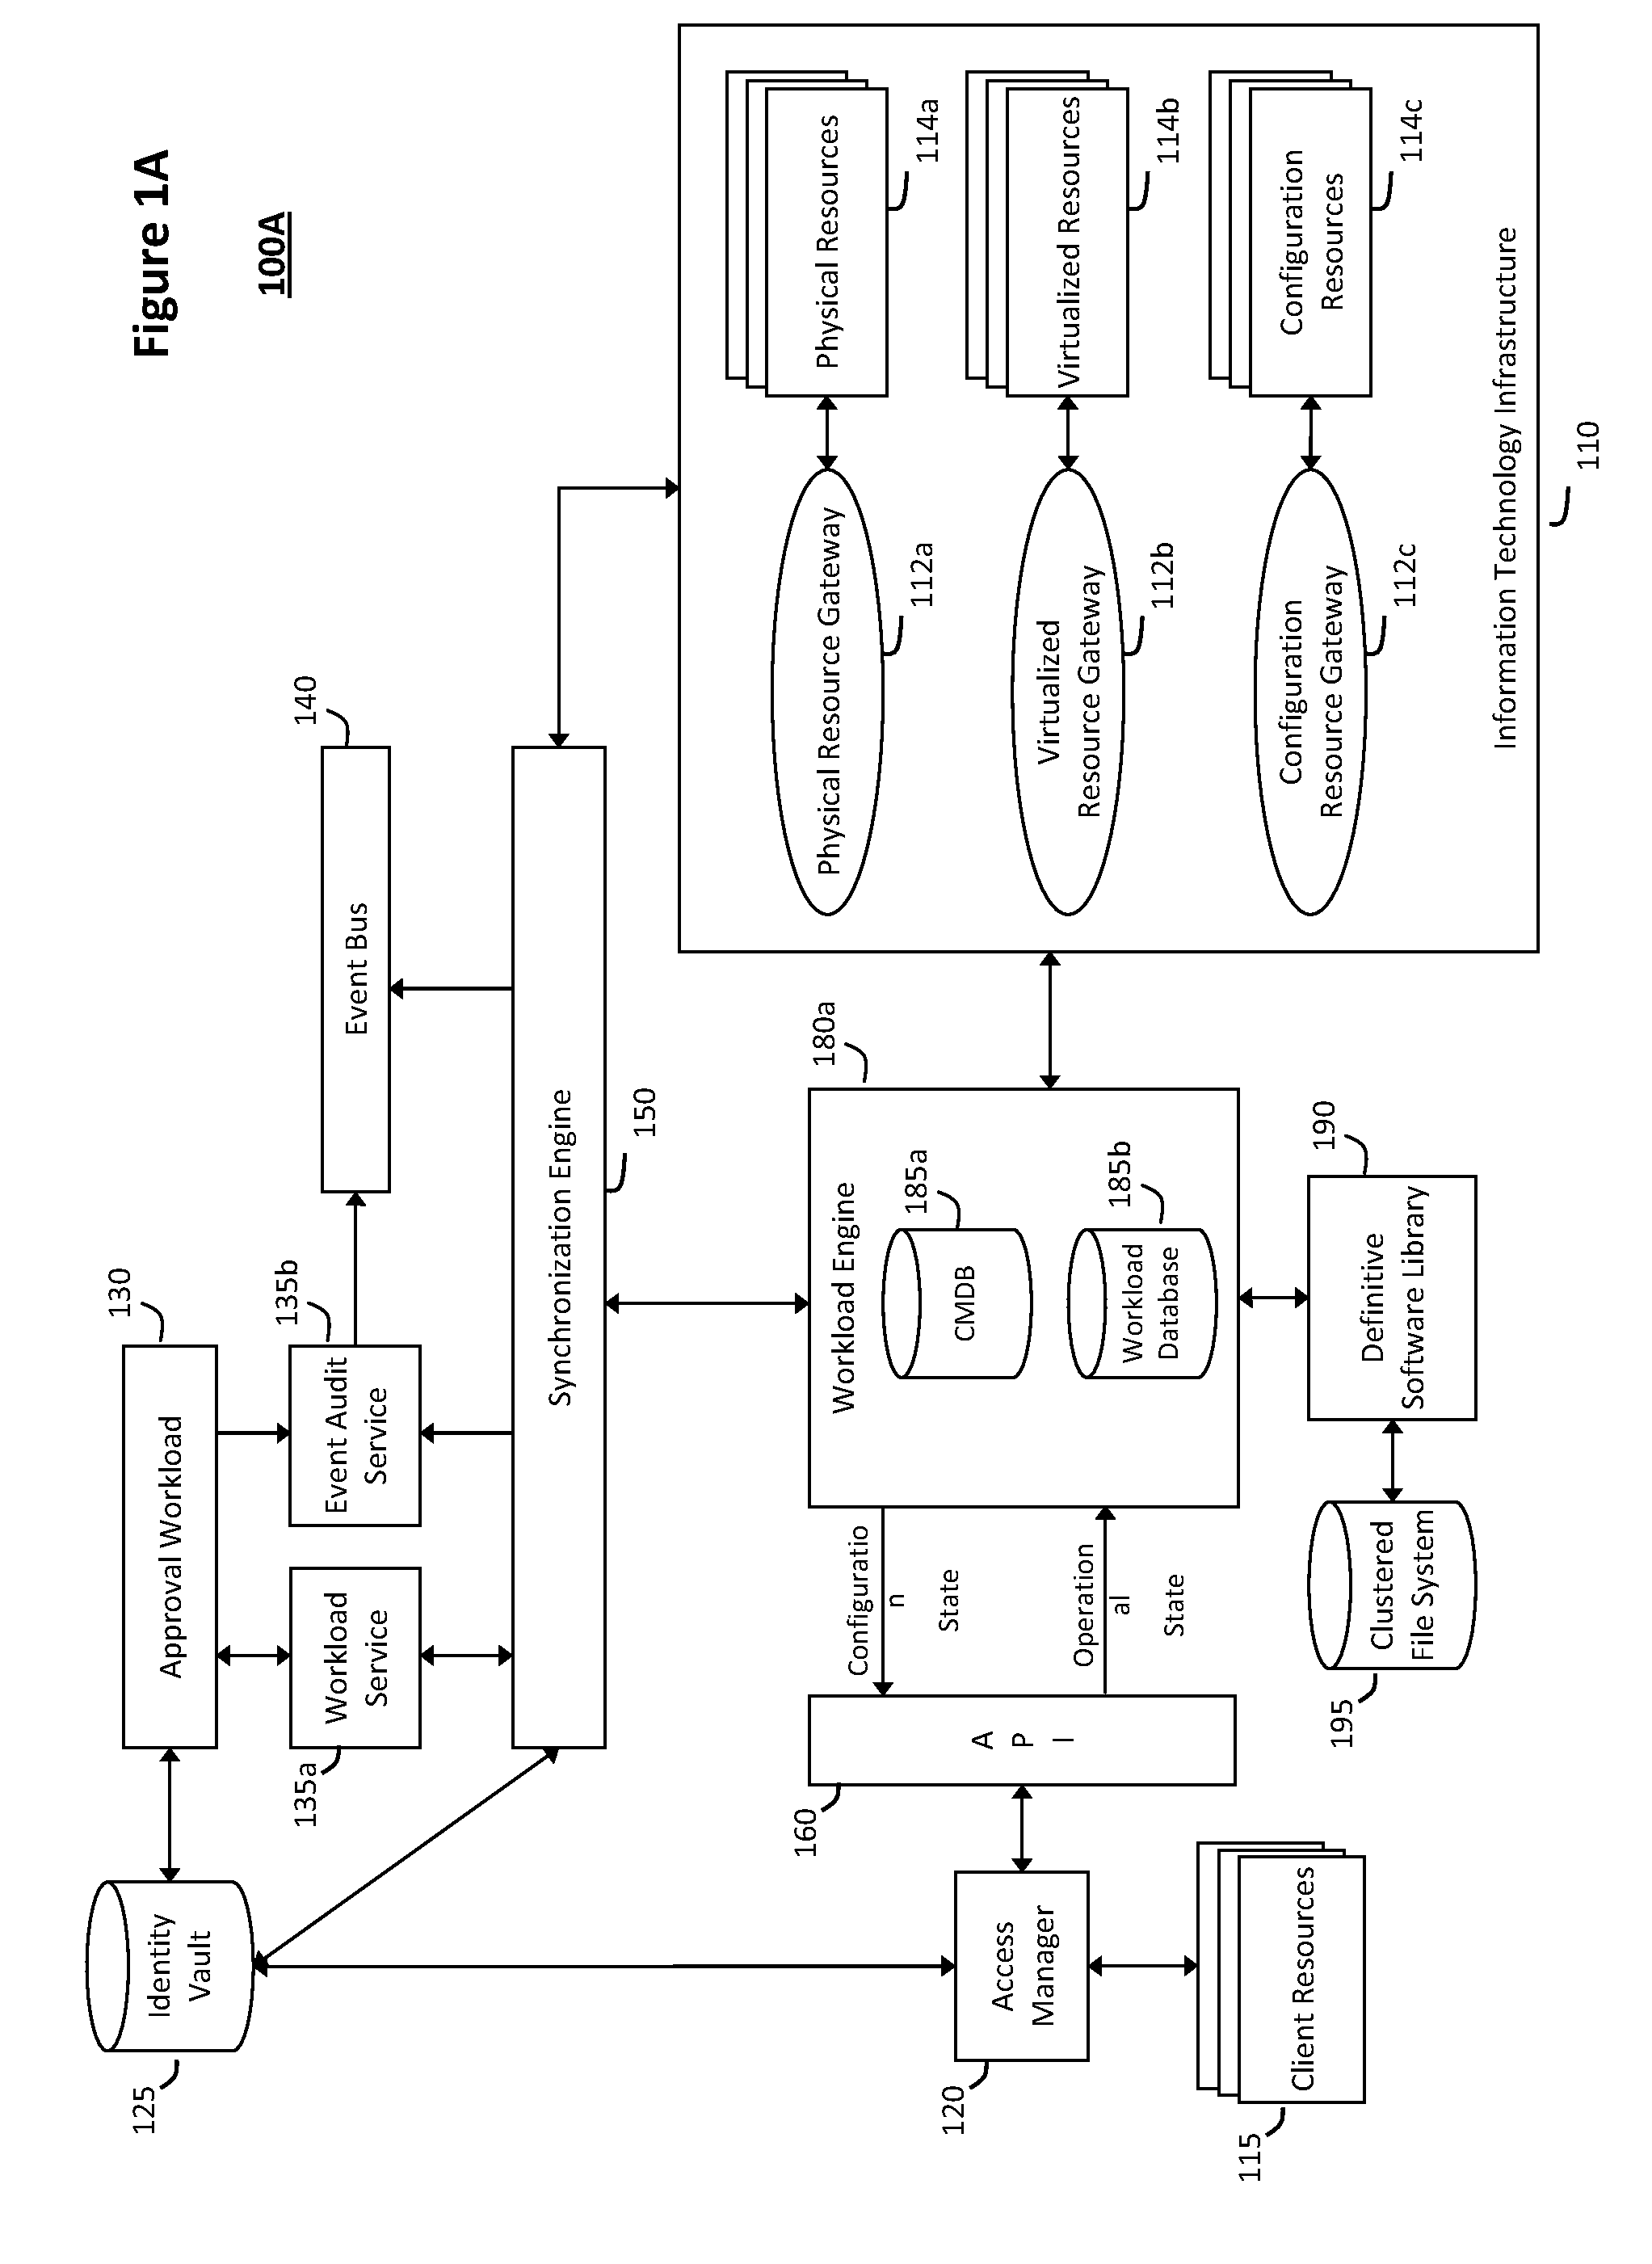 System and method for recording collaborative information technology processes in an intelligent workload management system